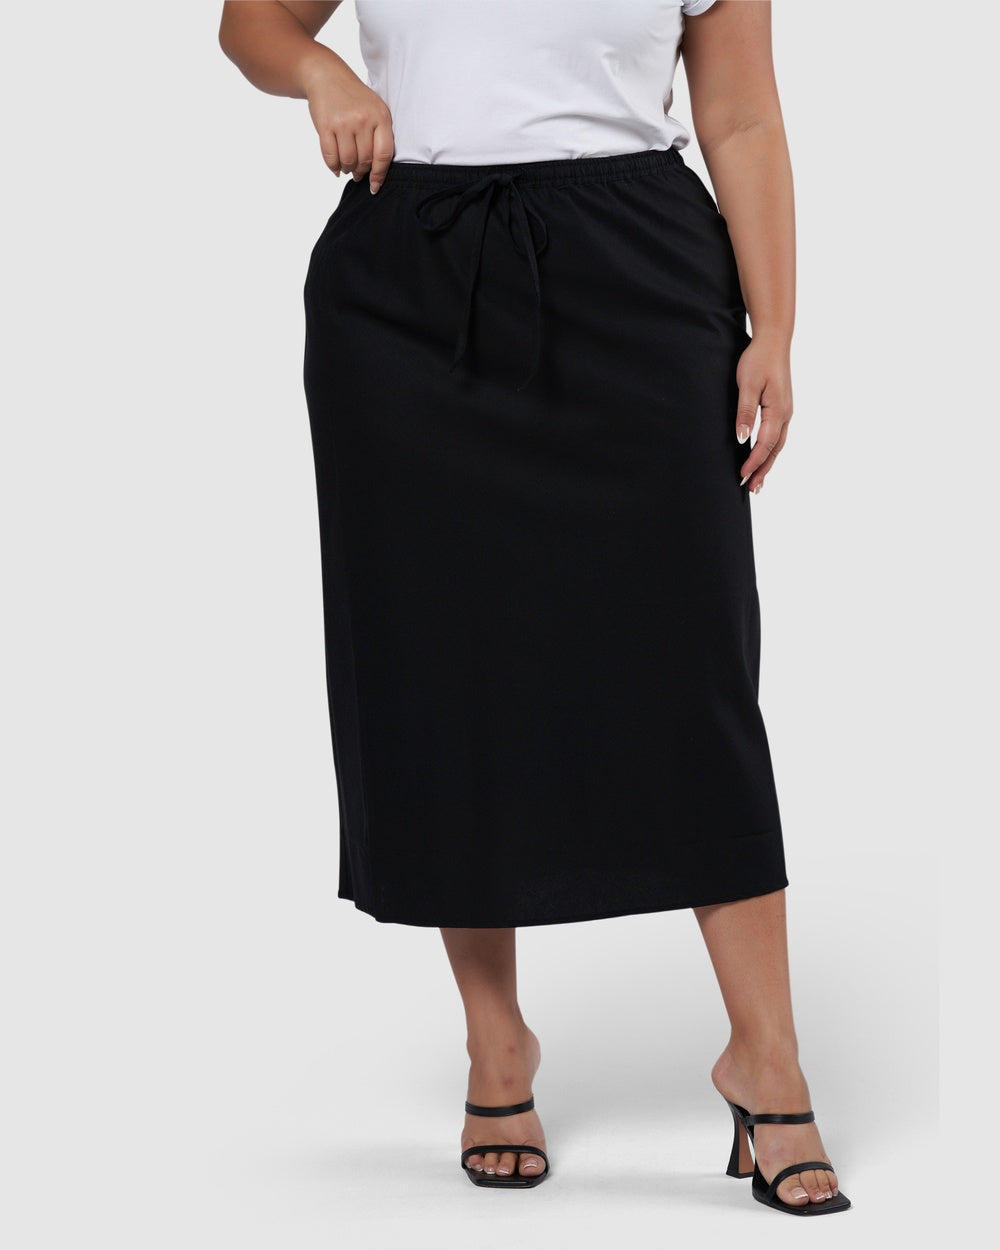 Linen A-Line skirt in neutral black so you can mix and match tops easily.